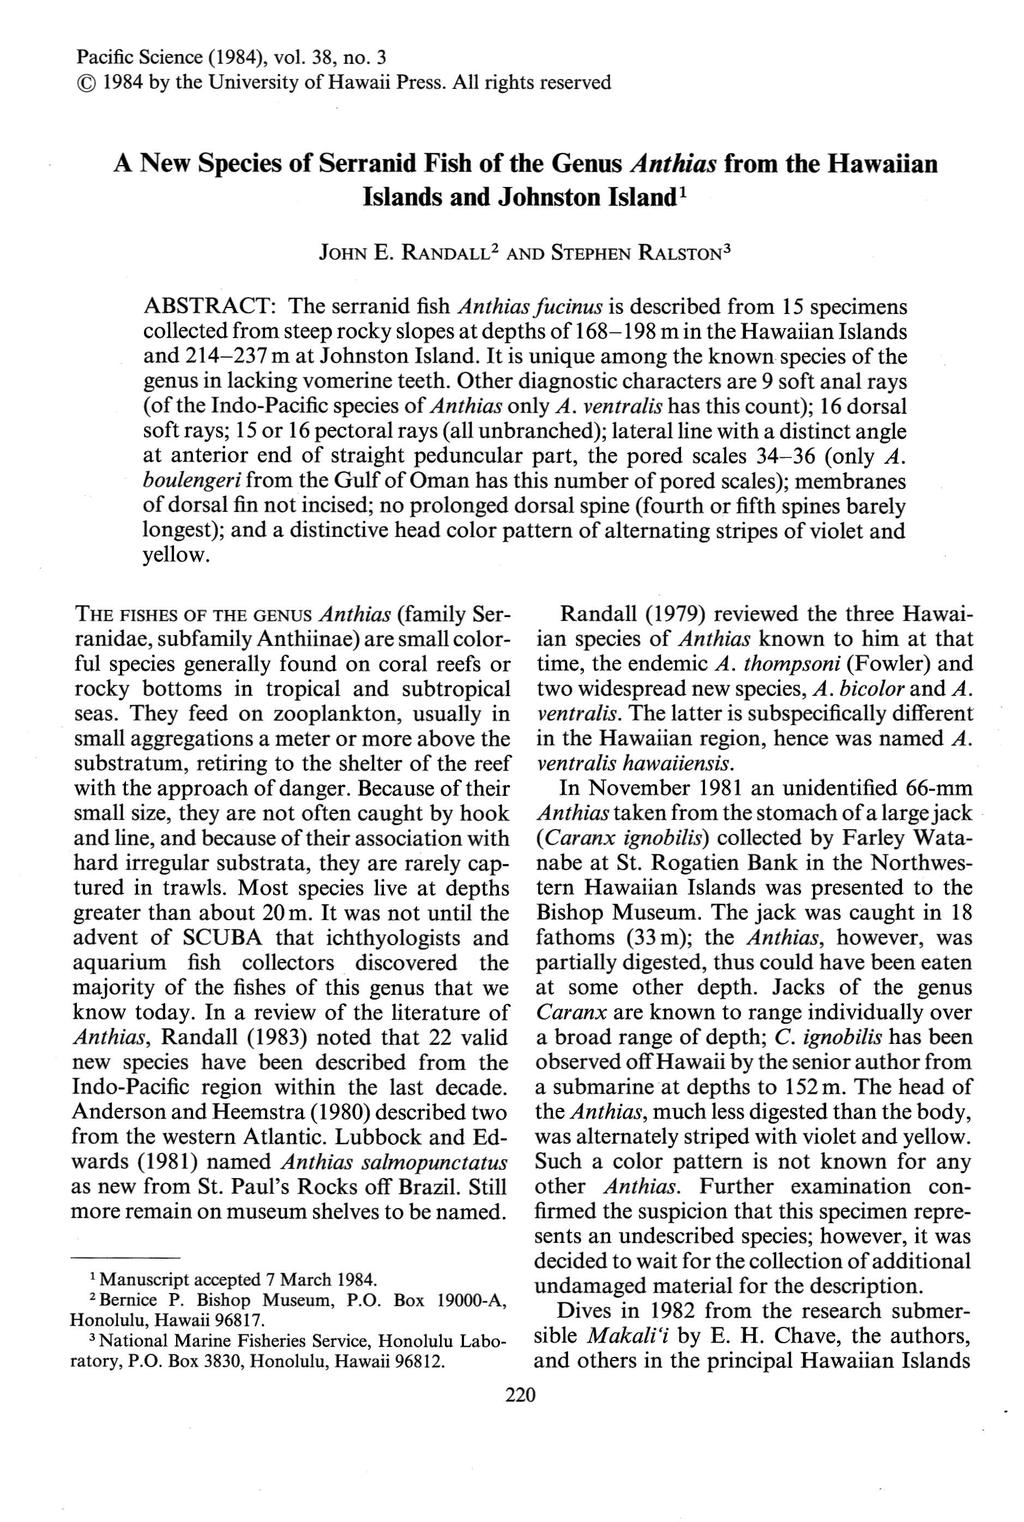 Pacific Science (1984), vol. 38, no. 3 1984 by the University of Hawaii Press.